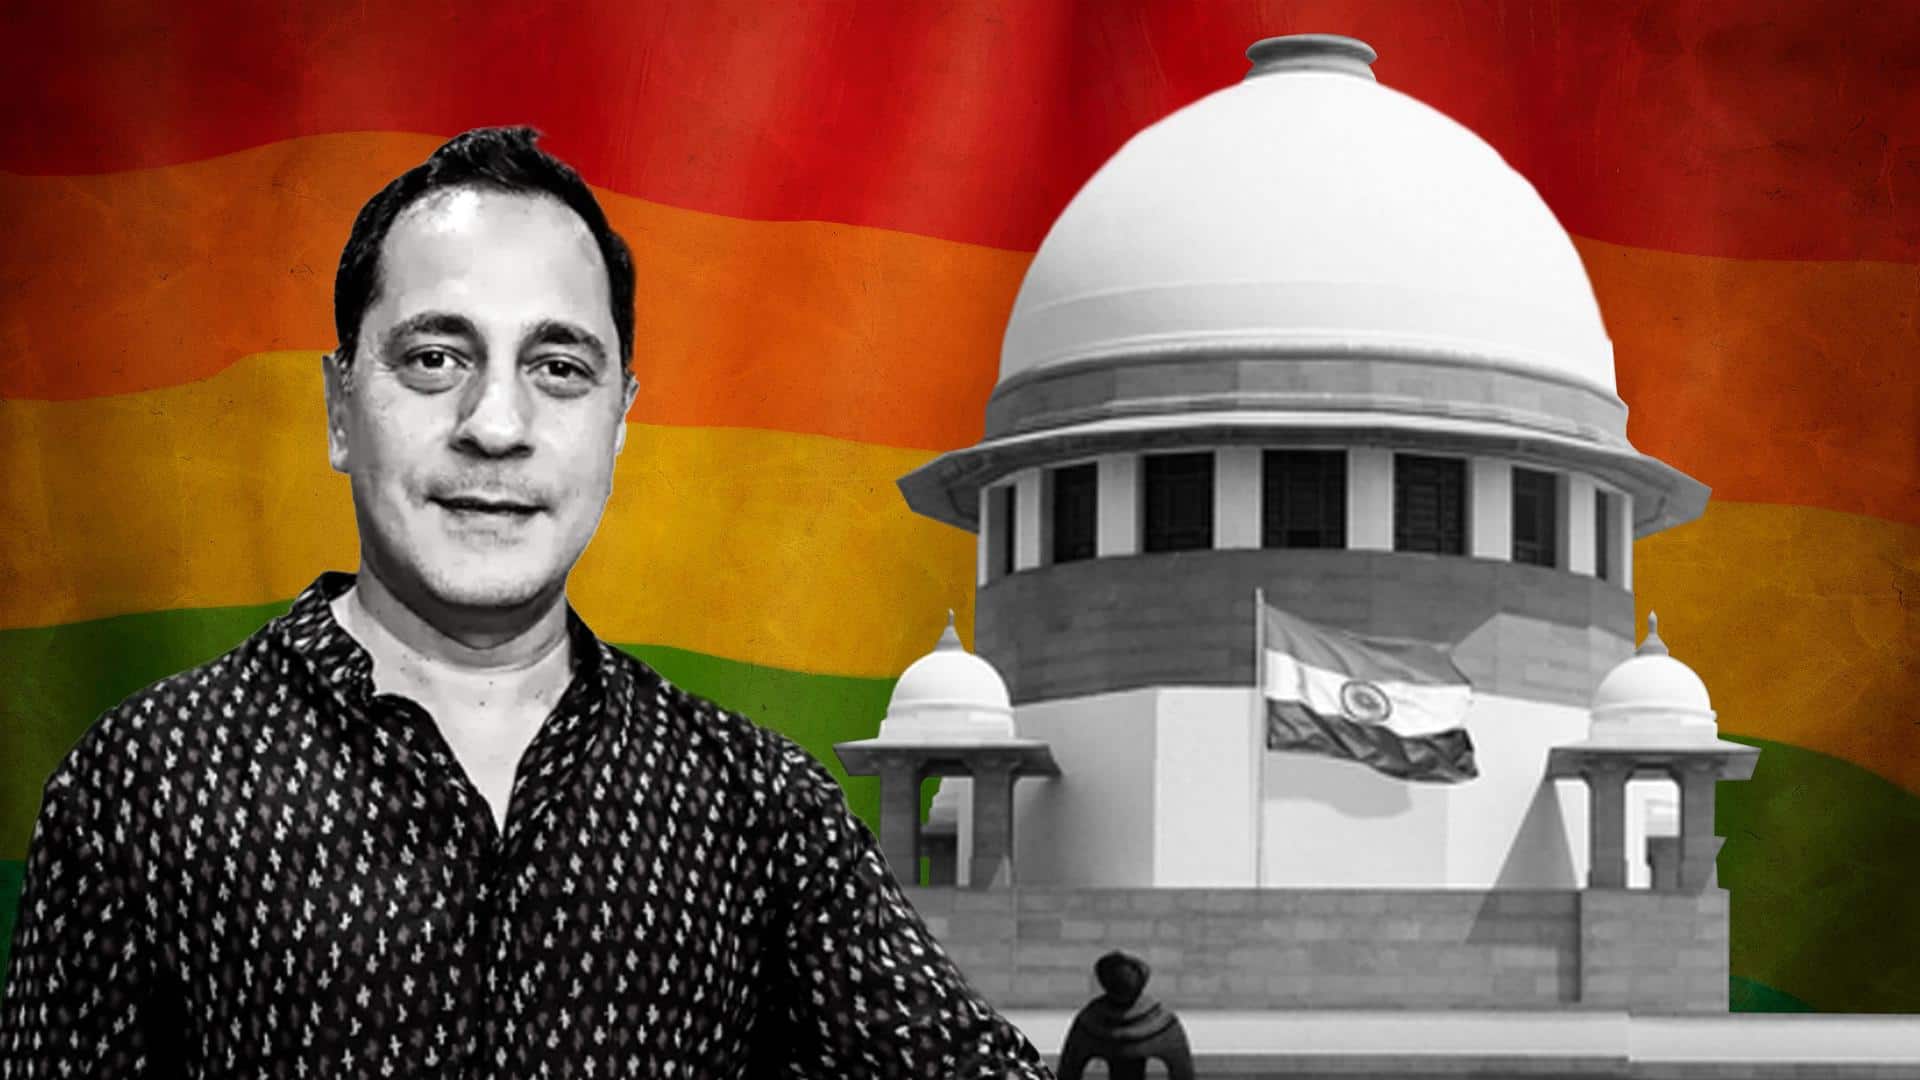 Promotion delayed due to my [homo]sexuality: Advocate Saurabh Kirpal